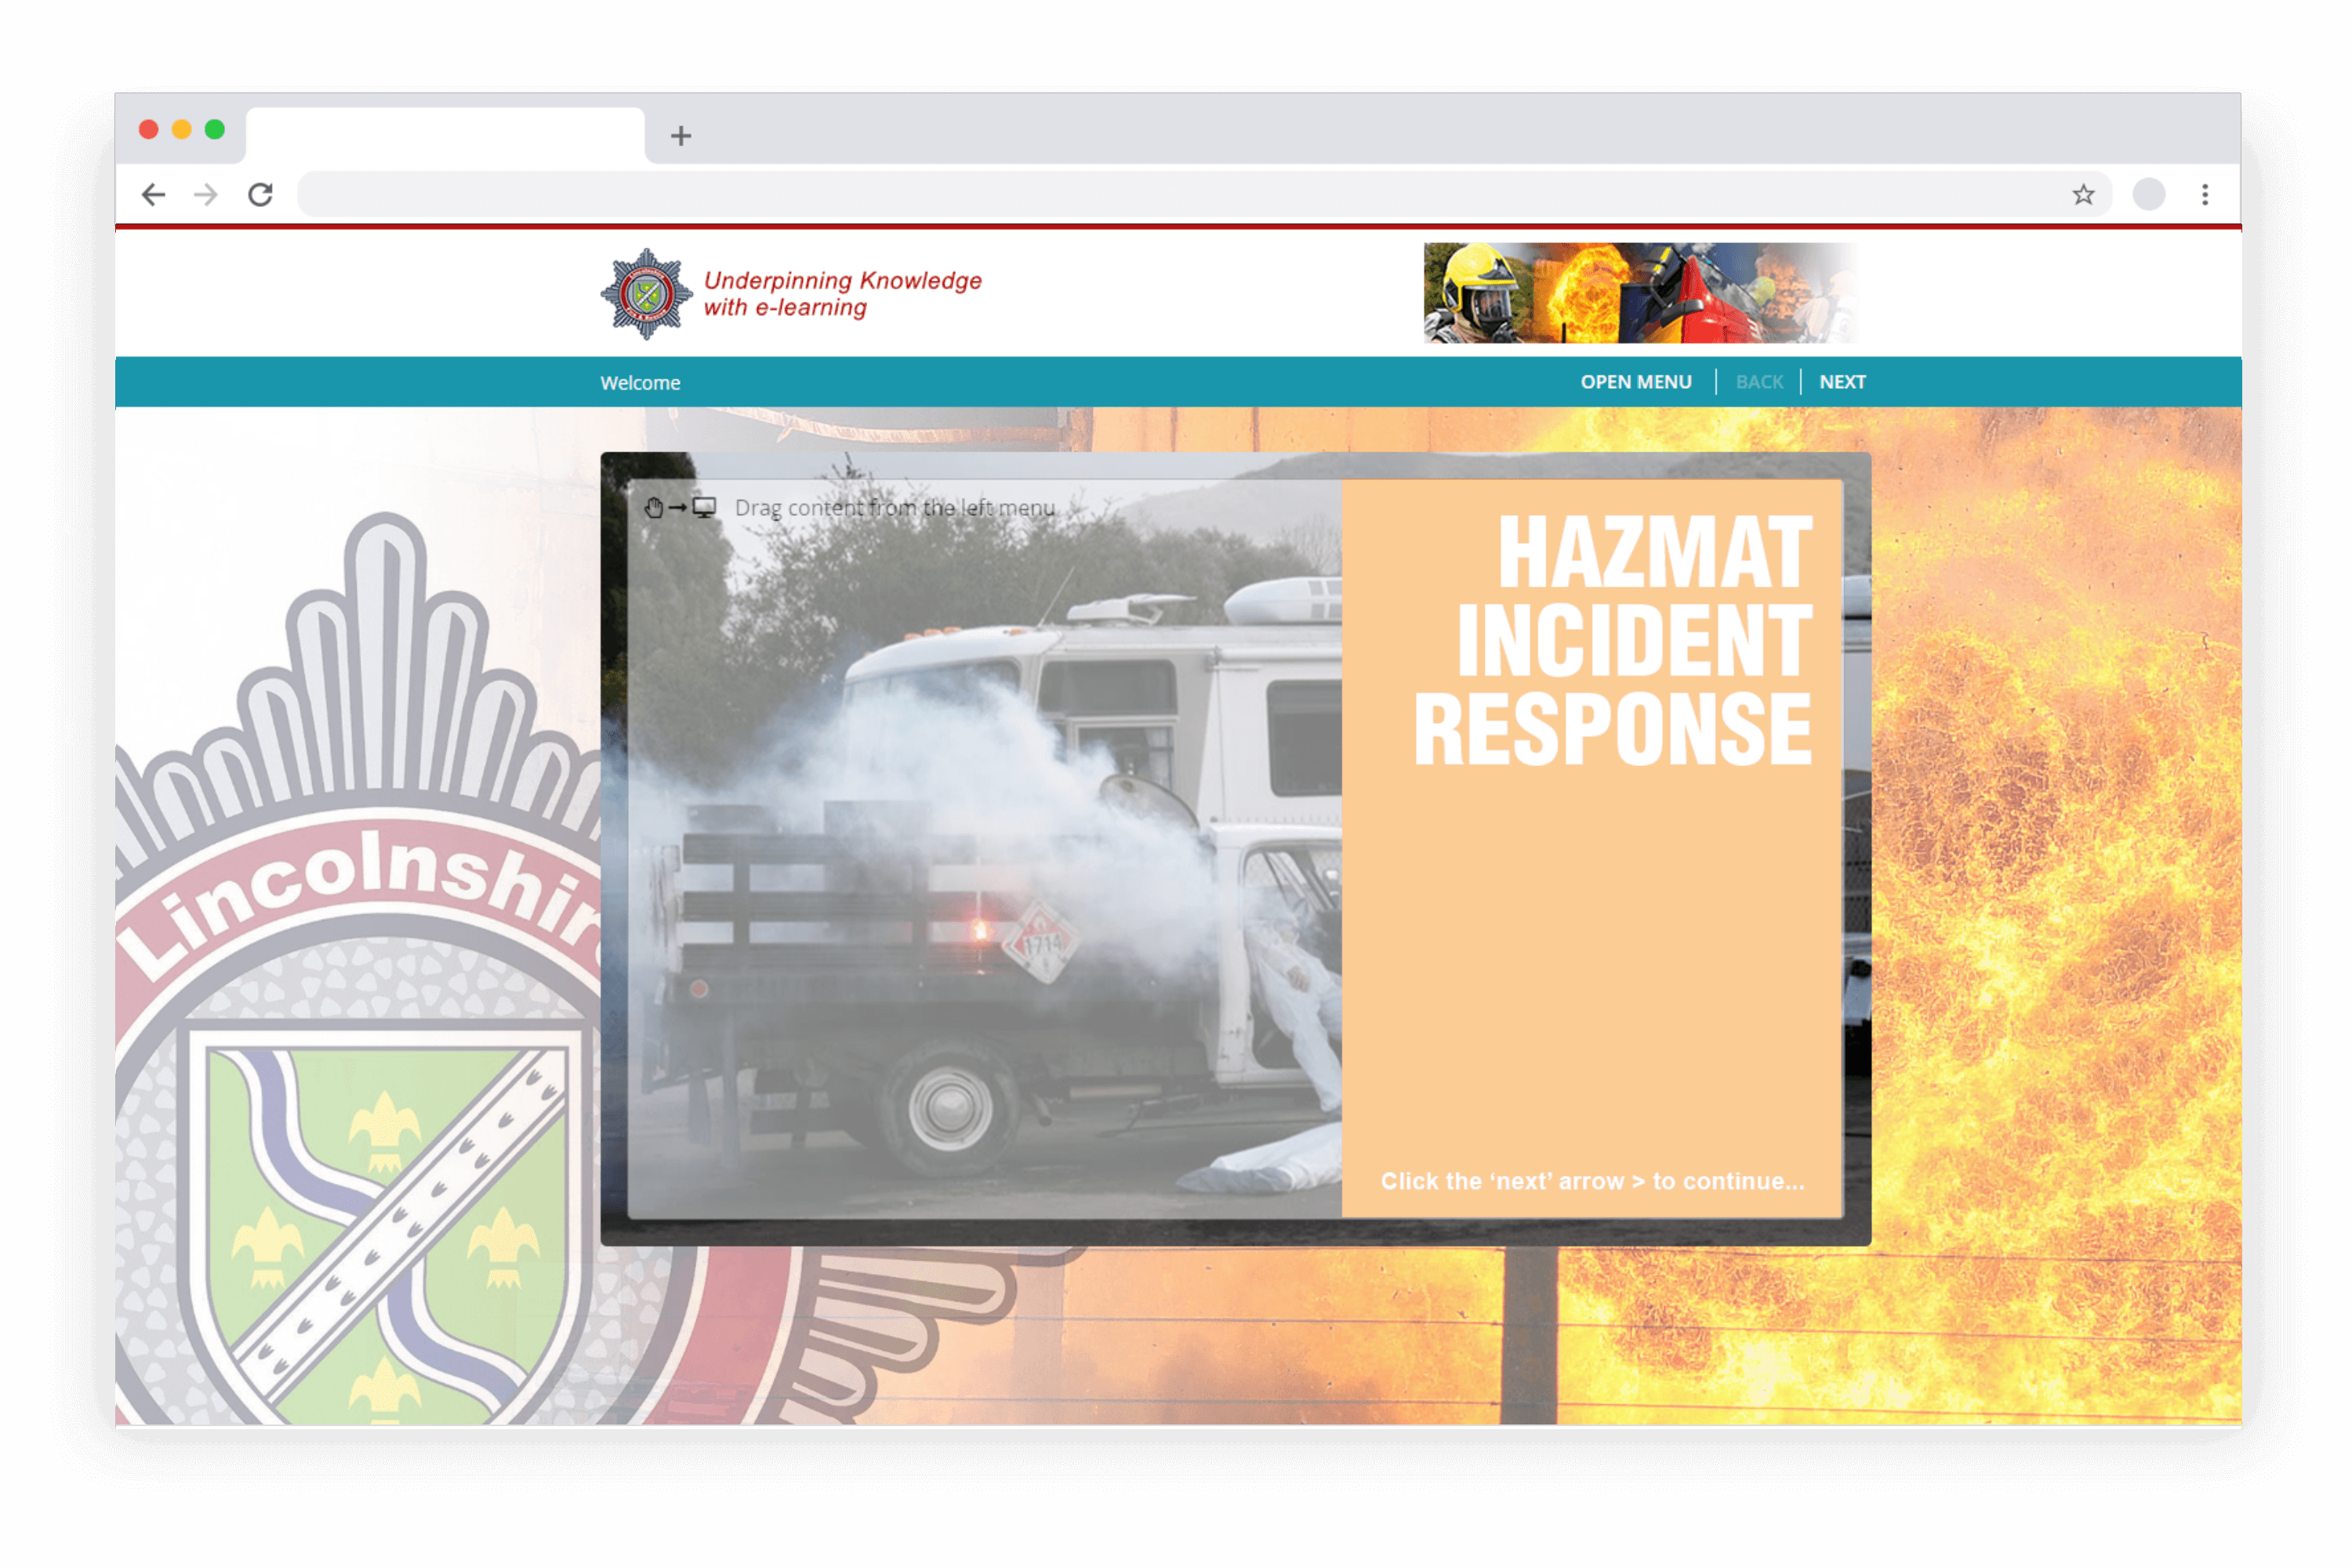 Example e-learning showing a hazmat incident responsive module developed in LAB Advanced